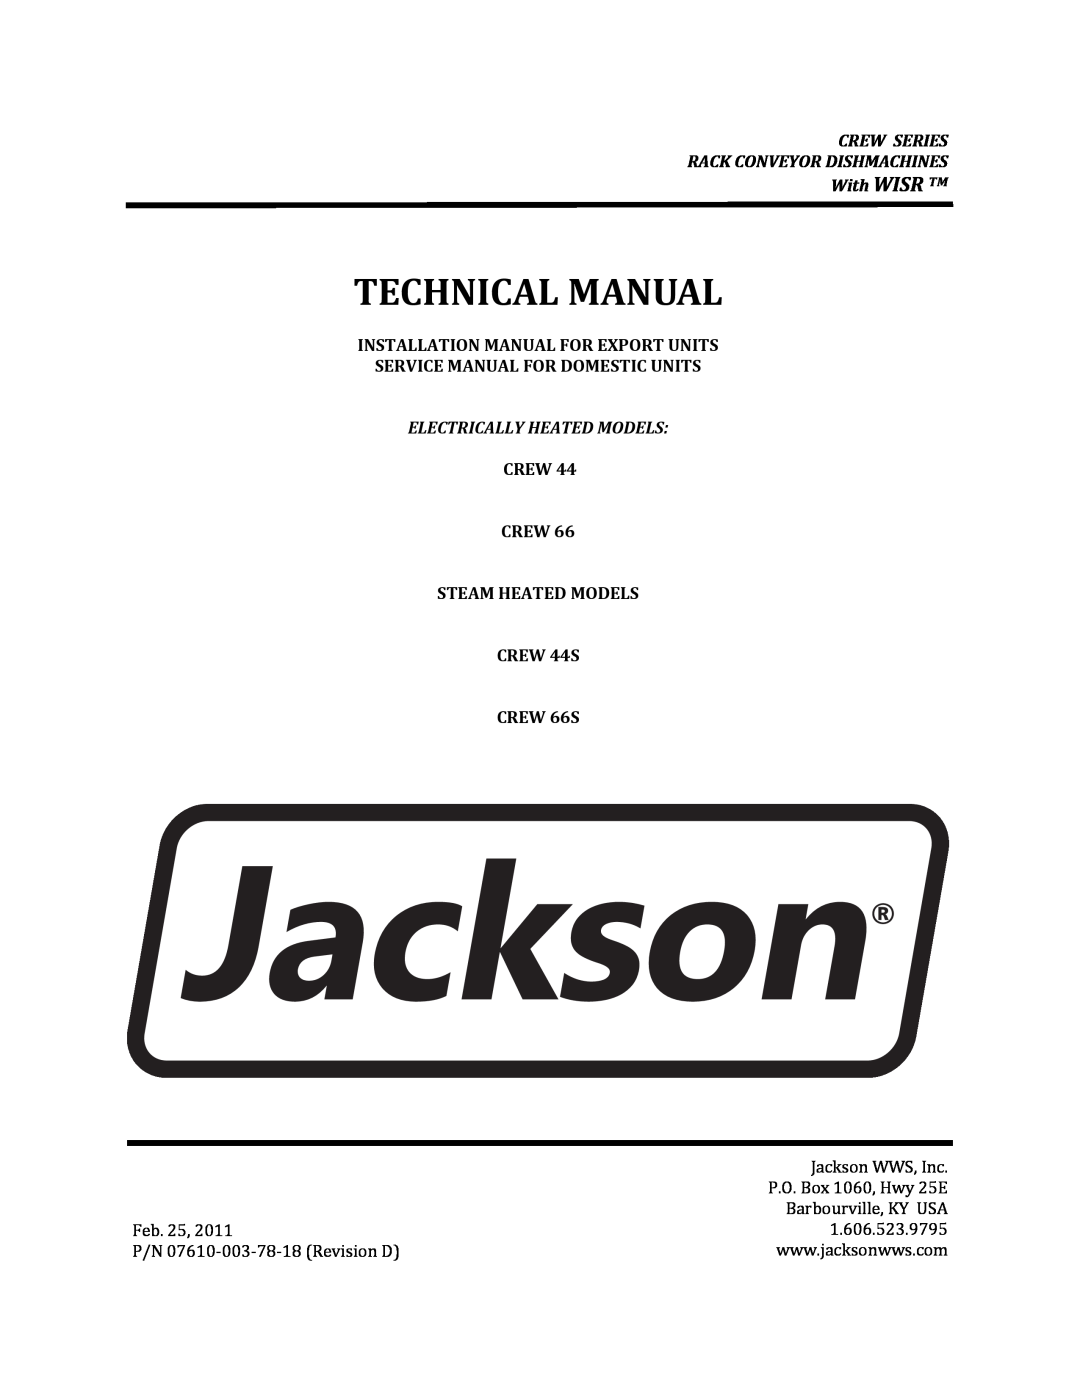 Jackson CREW 44S manual Technical Manual, CREW SERIES RACK CONVEYOR DISHMACHINES With WISR TM, Electrically Heated Models 